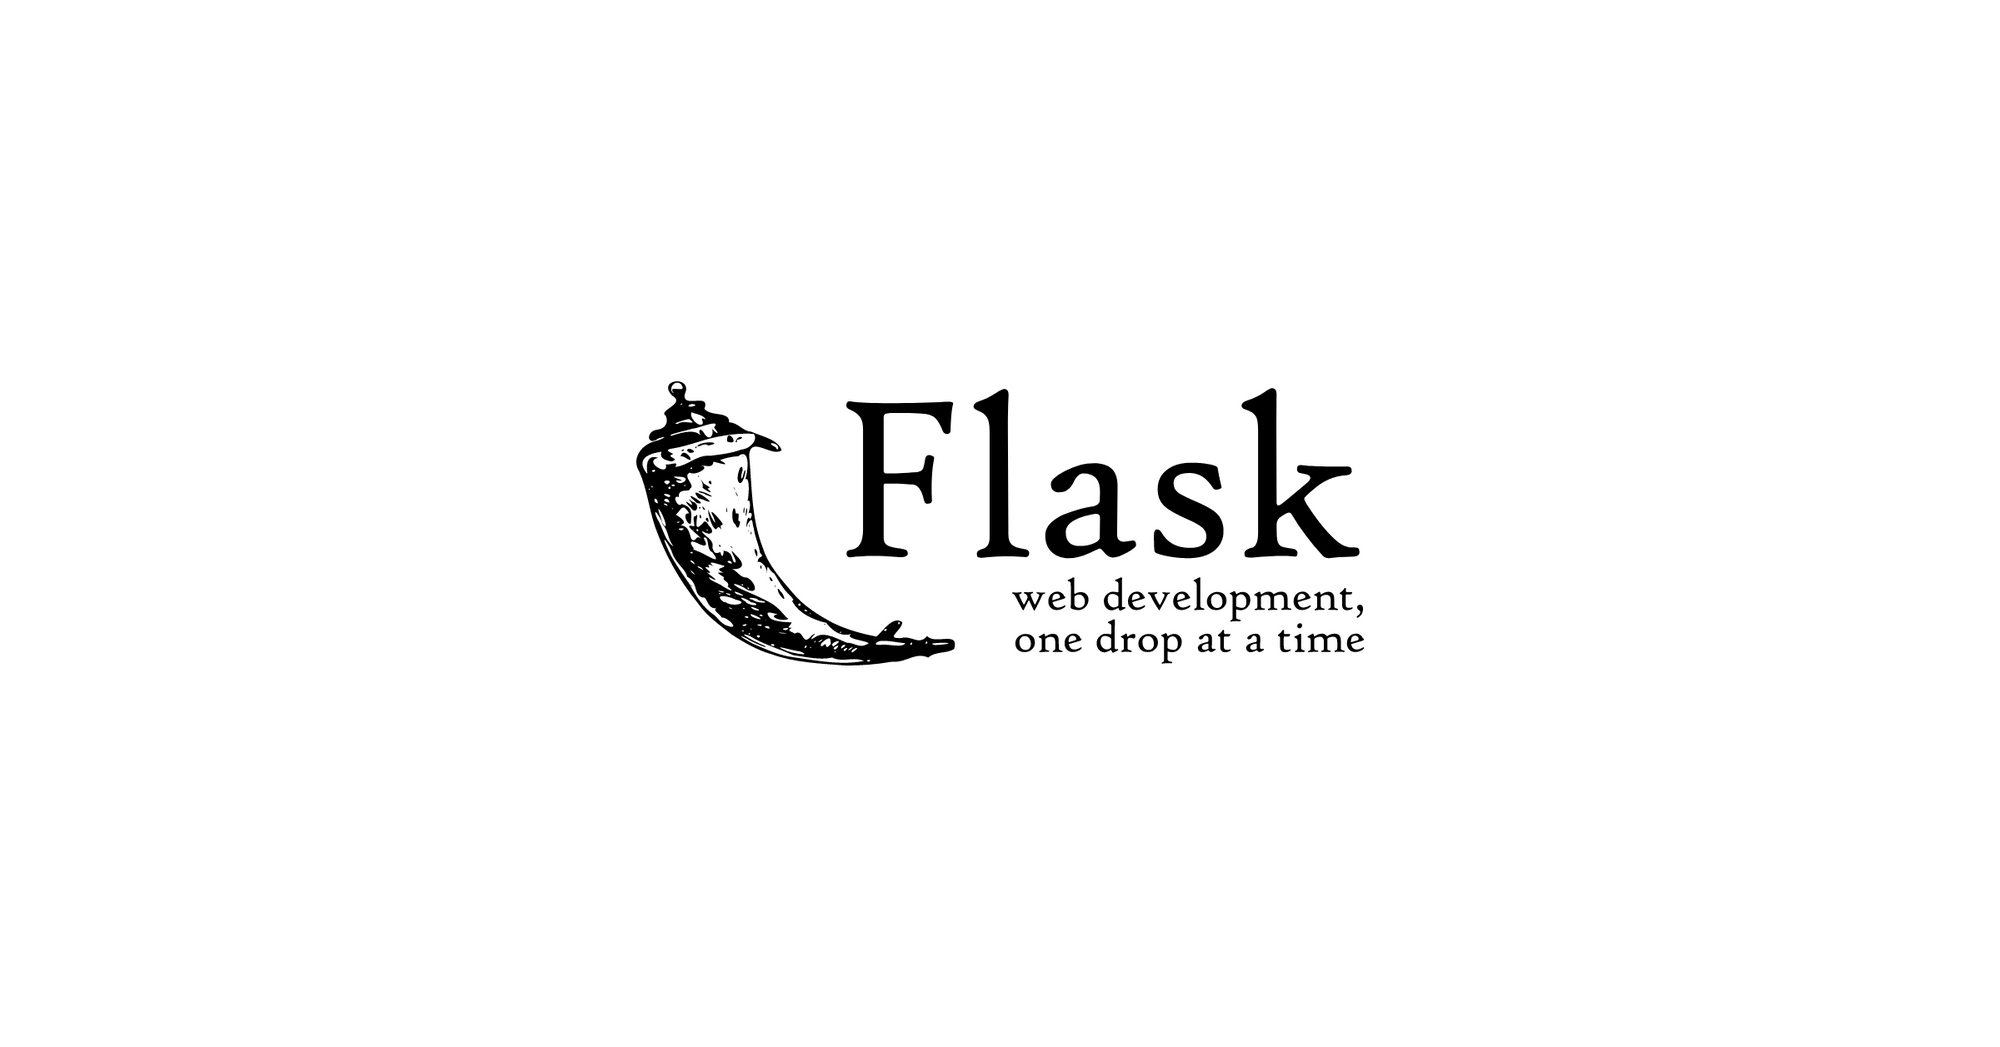 Two Domains, One Flask